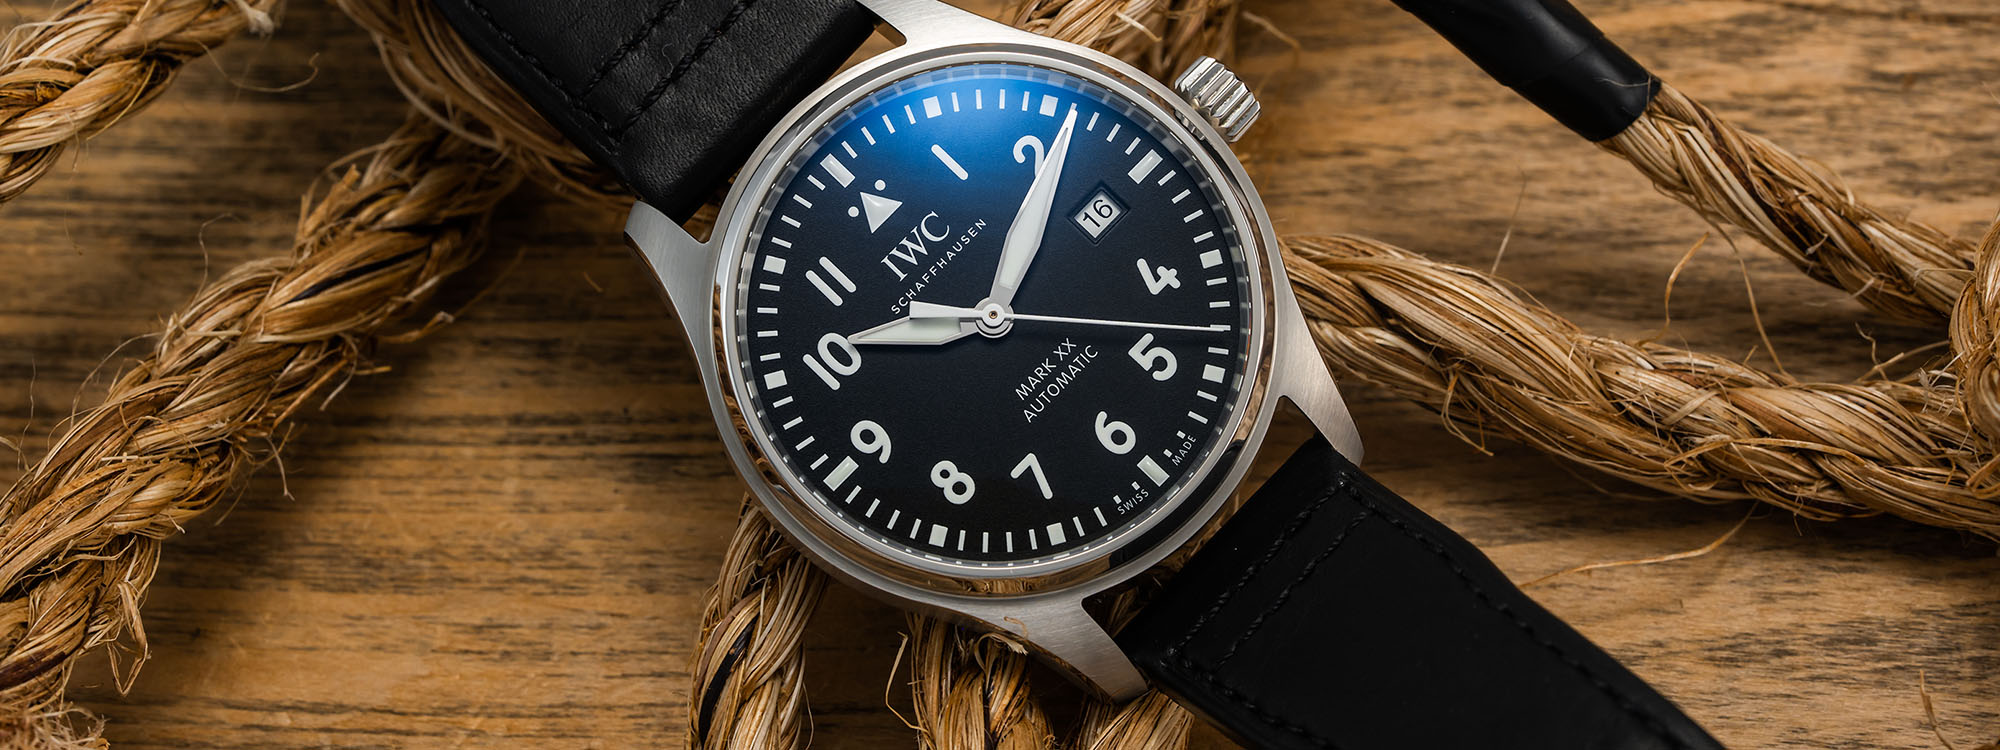 Flieger Watches: A Brief History and 14 Modern Fliegers from Entry-Lev |  Teddy Baldassarre